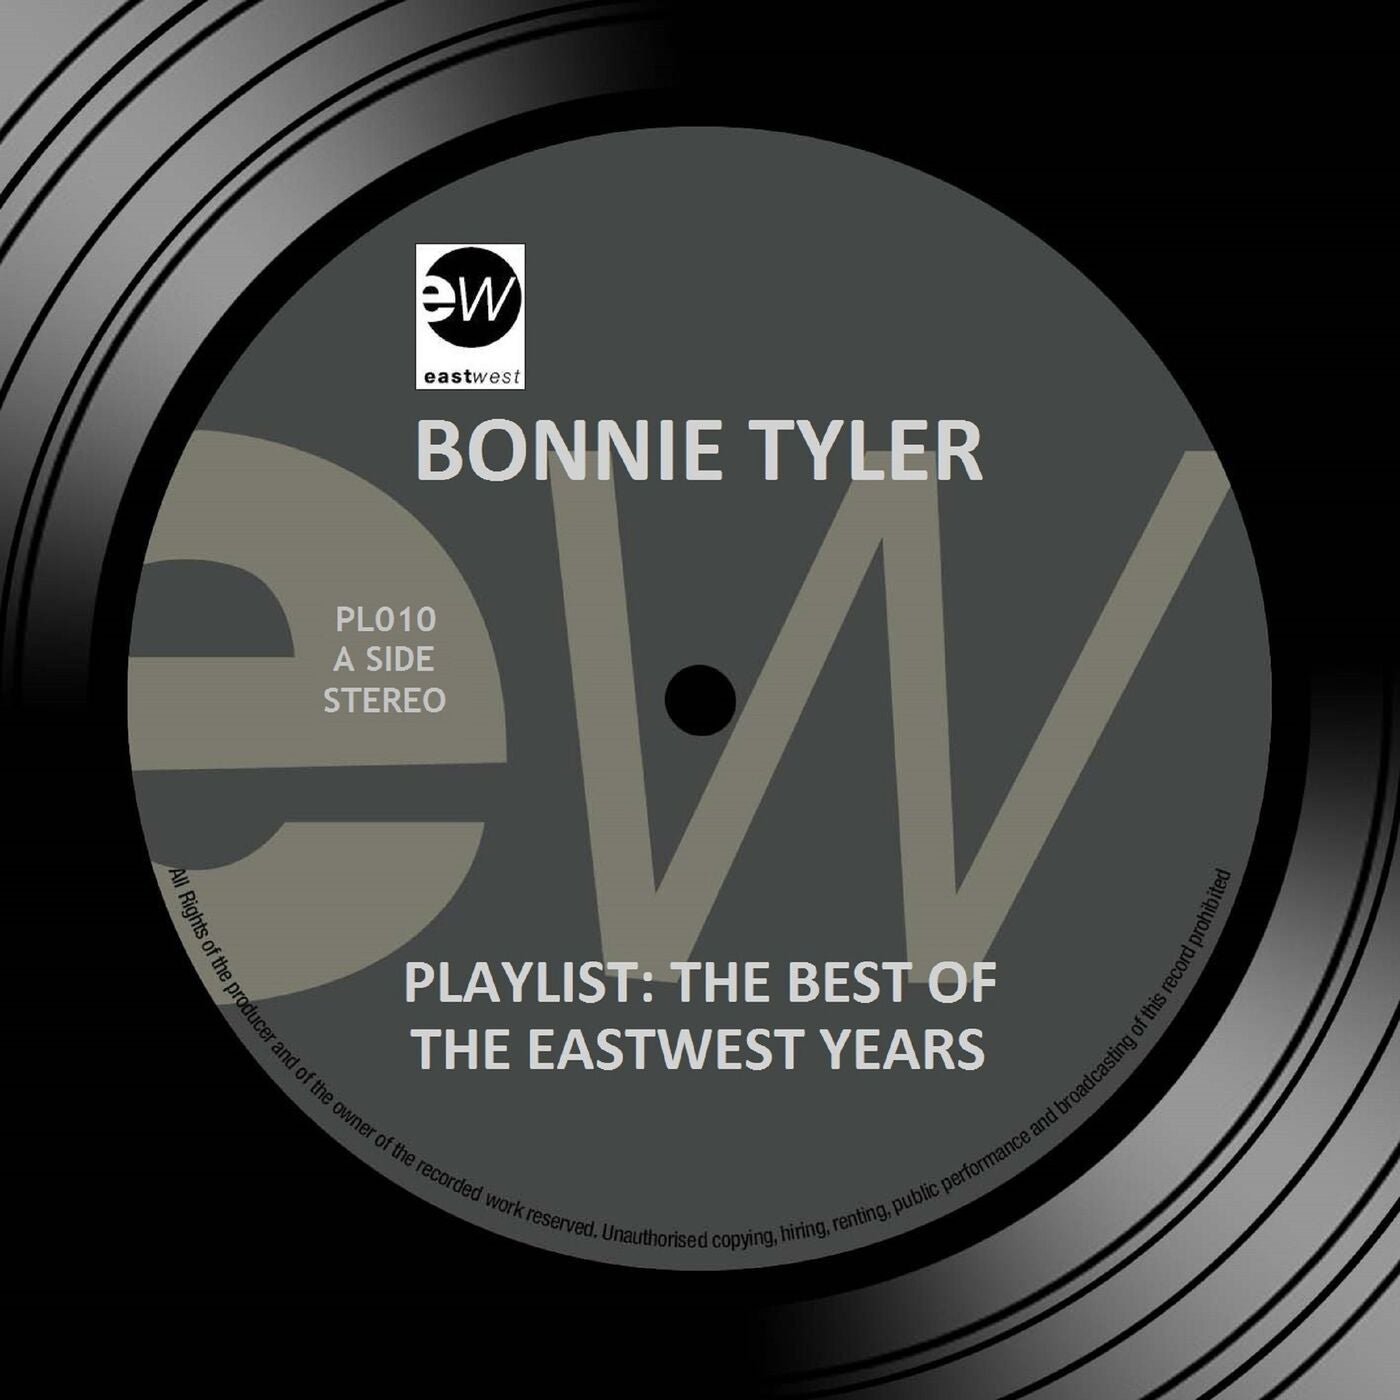 Playlist: The Best Of The EastWest Years .css-14f03ro:hover{-webkit-text-decoration:underline;text-decoration:underline;}Bonnie Tyler More from this artistInto The Sunset Duet (with Bonnie Tyler)Free SpiritLimelightGoodbye to the Island (Expanded Edition)Diamond Cut (Expanded Edition)The World Starts Tonight (Expanded Version)Simply BelieveMusic... The Air That I BreatheMore from this labelHigh DramaCan You Hear the Wind Blow (2023 Remix)Getting OlderHolding Out for a HeroOrdinary WorldBreak Every Rule (2022 Remaster)Total Eclipse (2022 Remaster)Sweet Caroline (So Good Version)